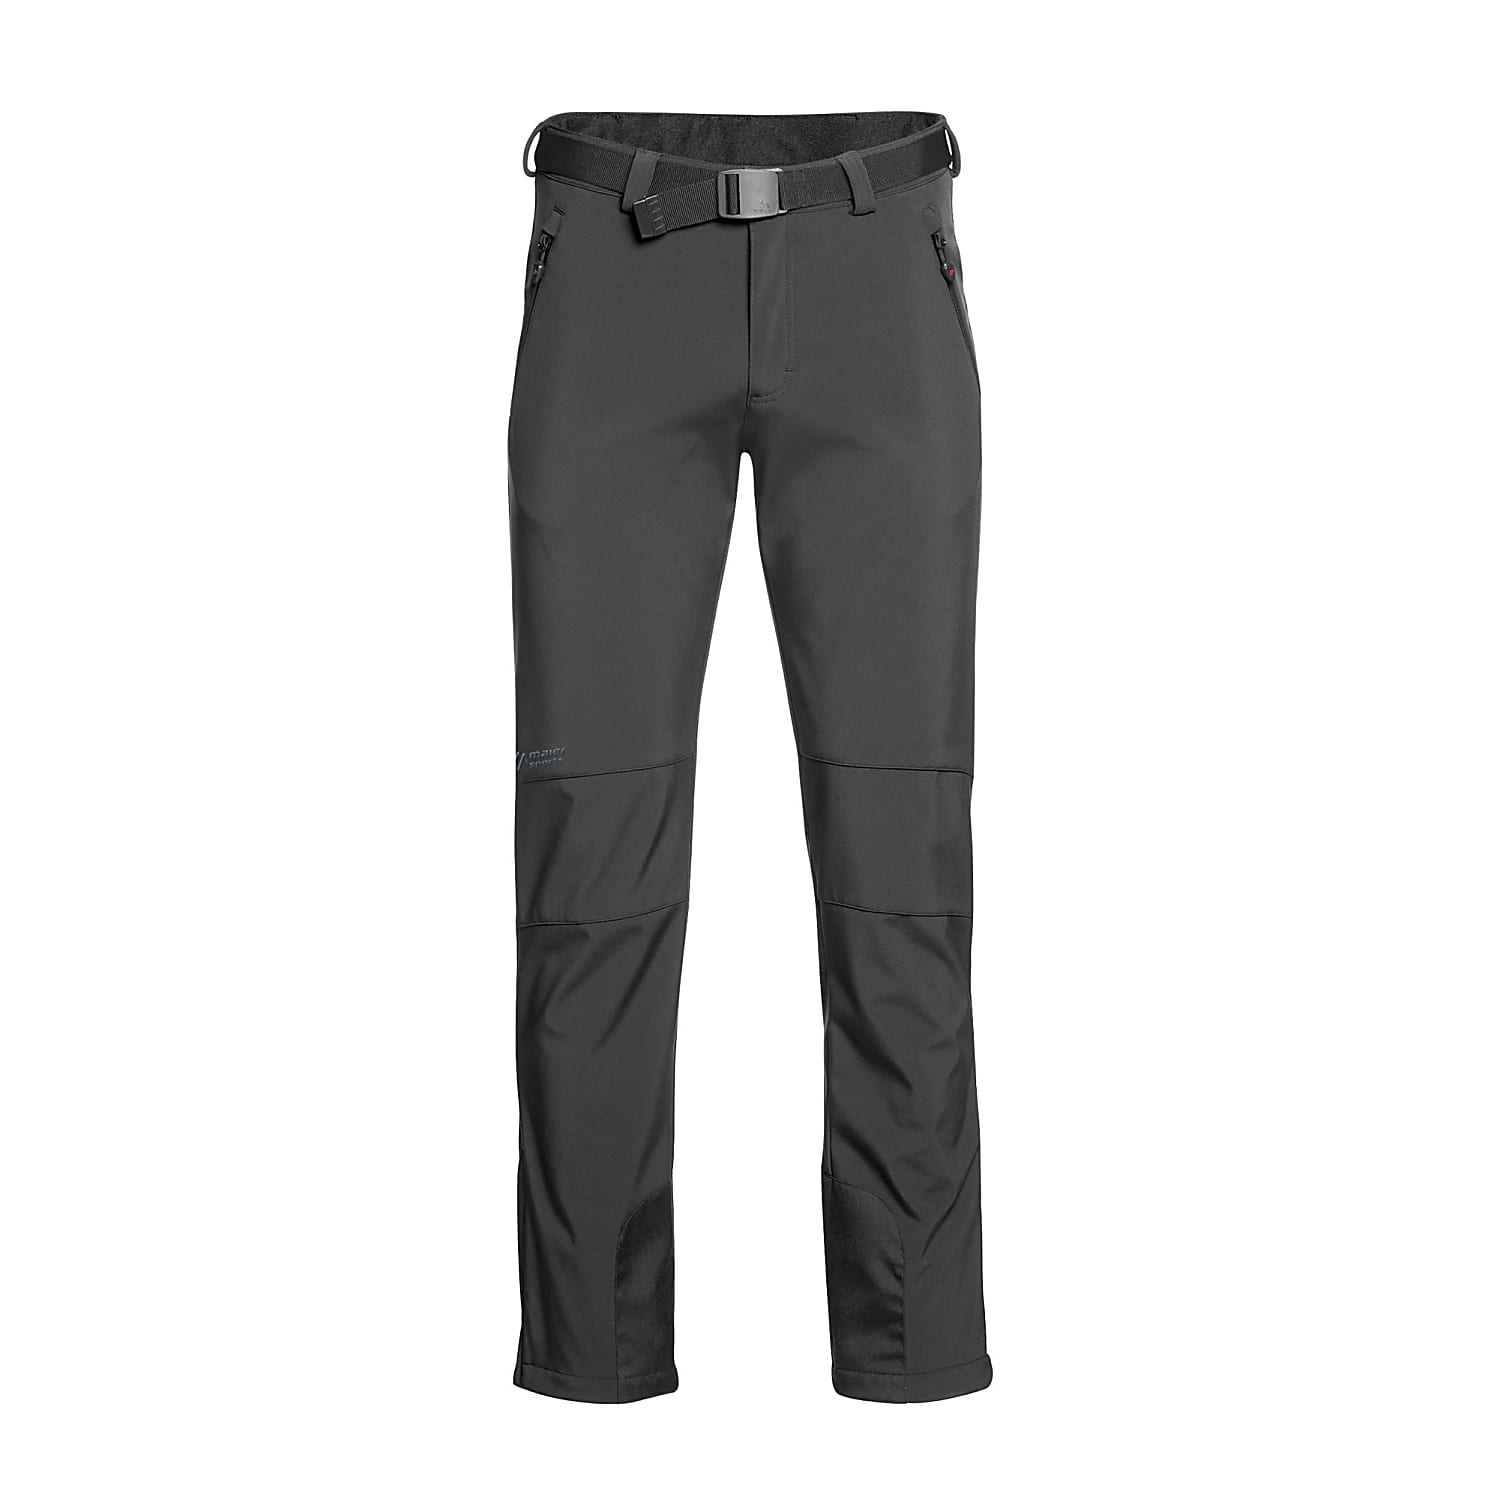 cheap TECH Sports PANTS OVERSIZE, M - and Maier Fast Black shipping